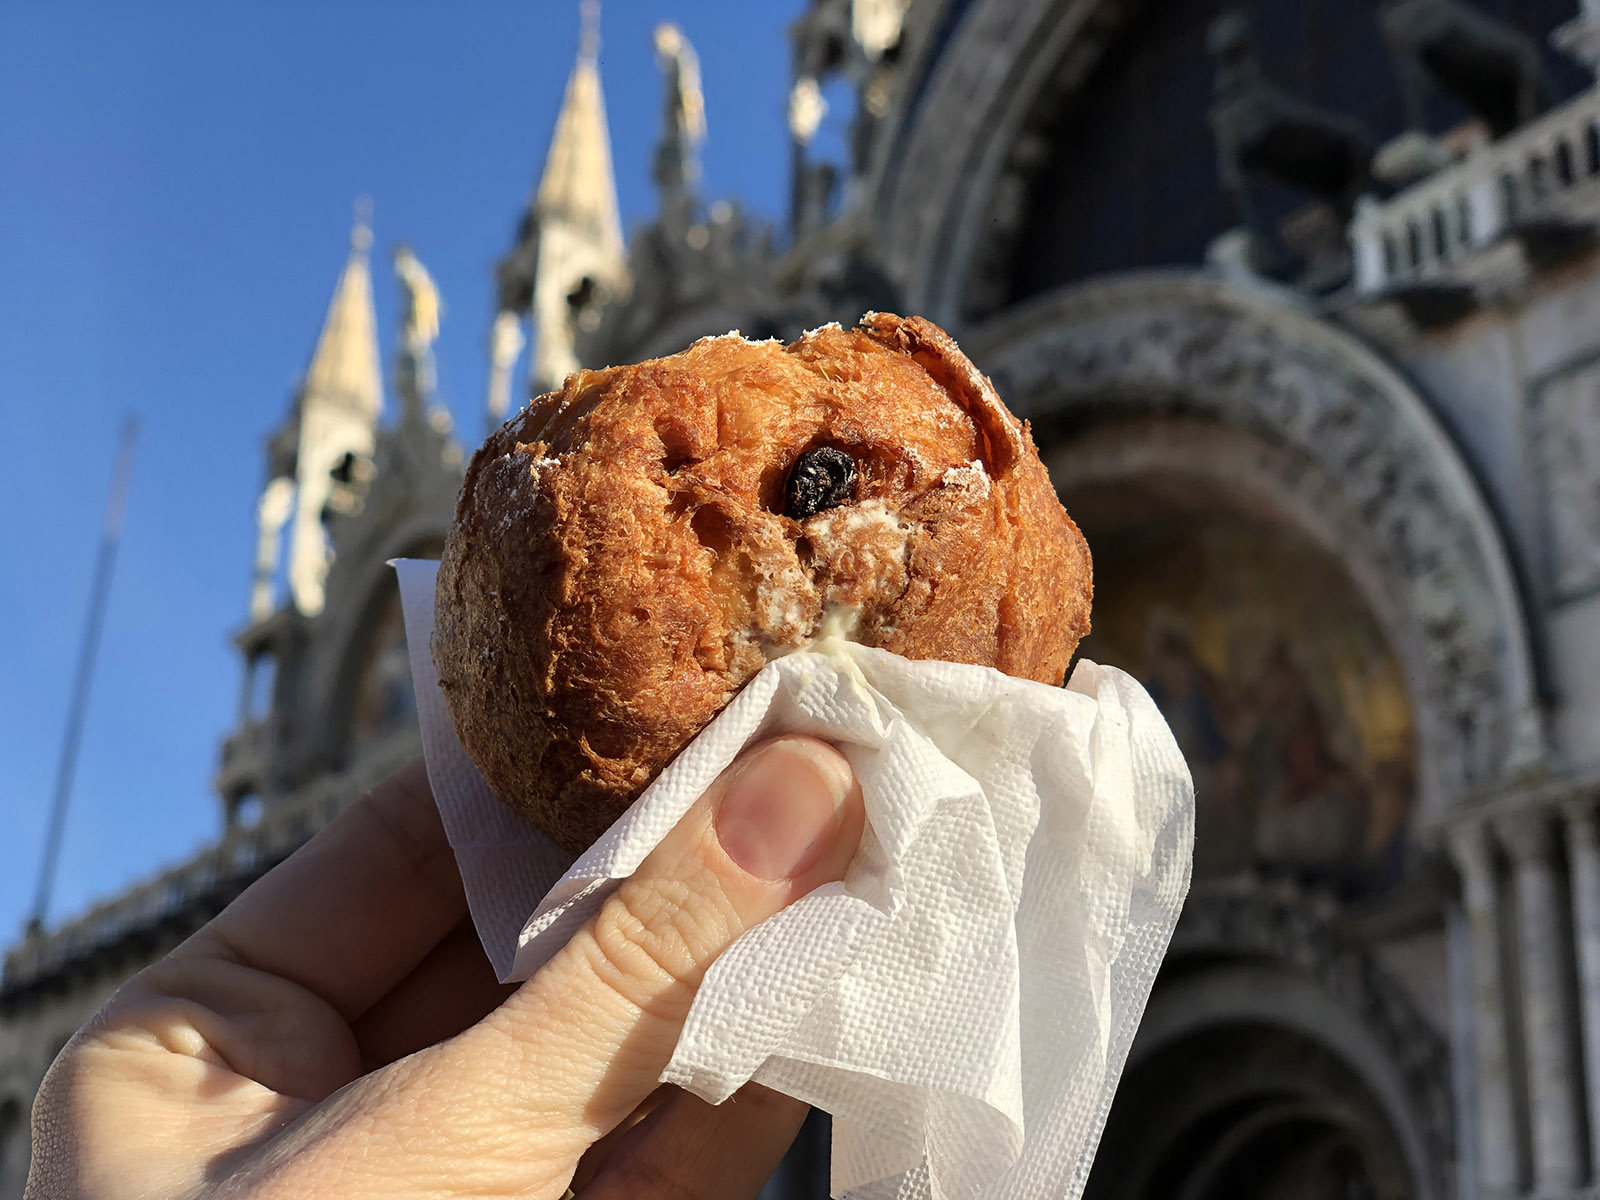 Le frìtole, the best way to celebrate the Carnival in Venice